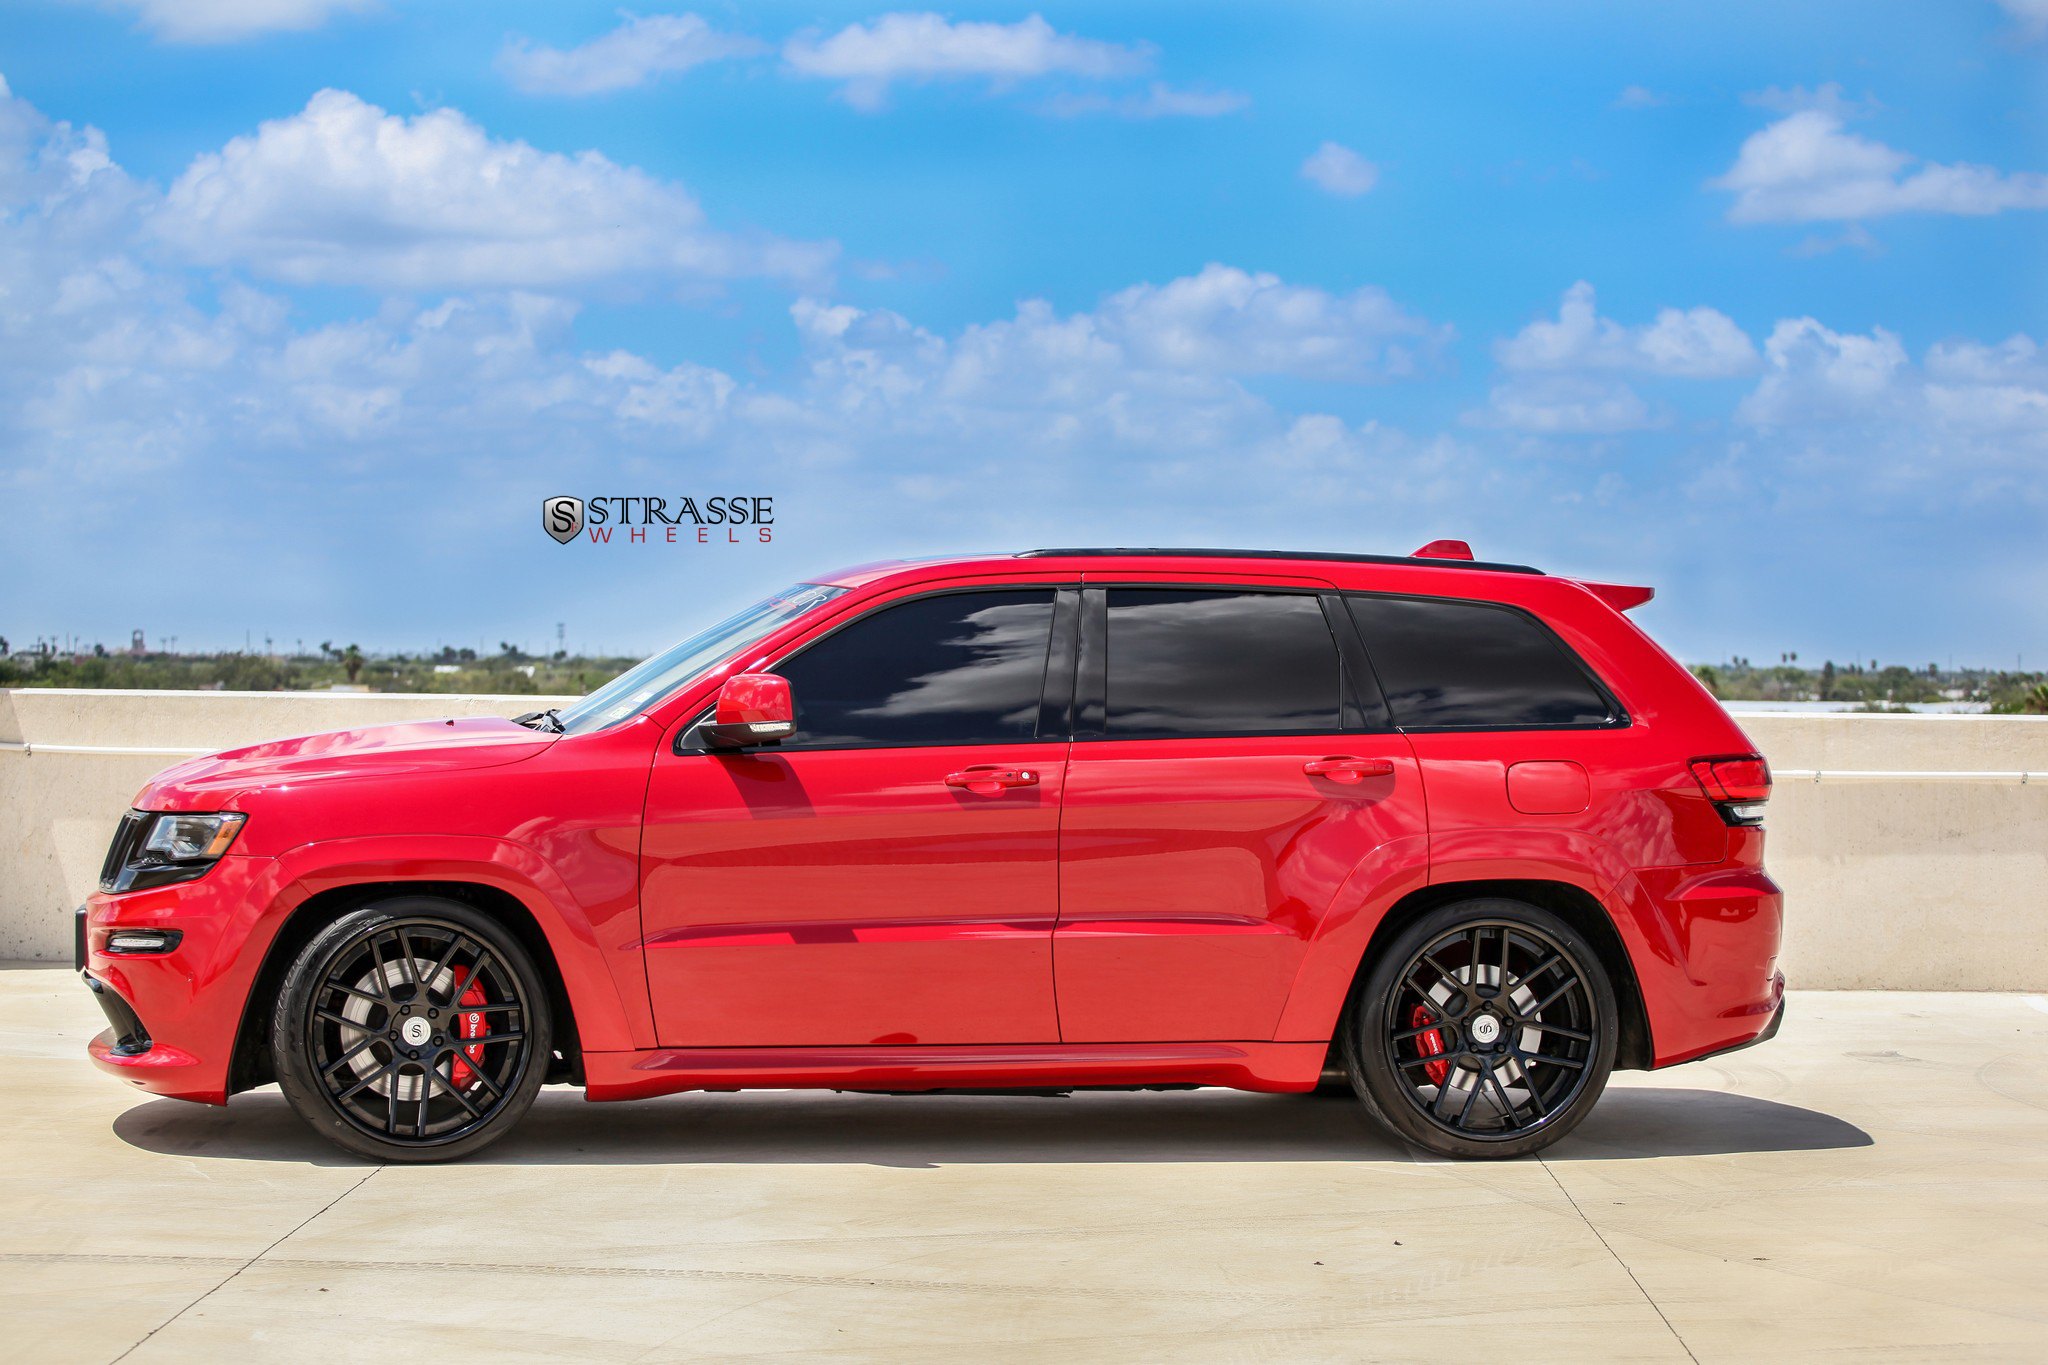 Gloss Black Strasse Wheels on Red Jeep Grand Cherokee - Photo by Strasse Forged